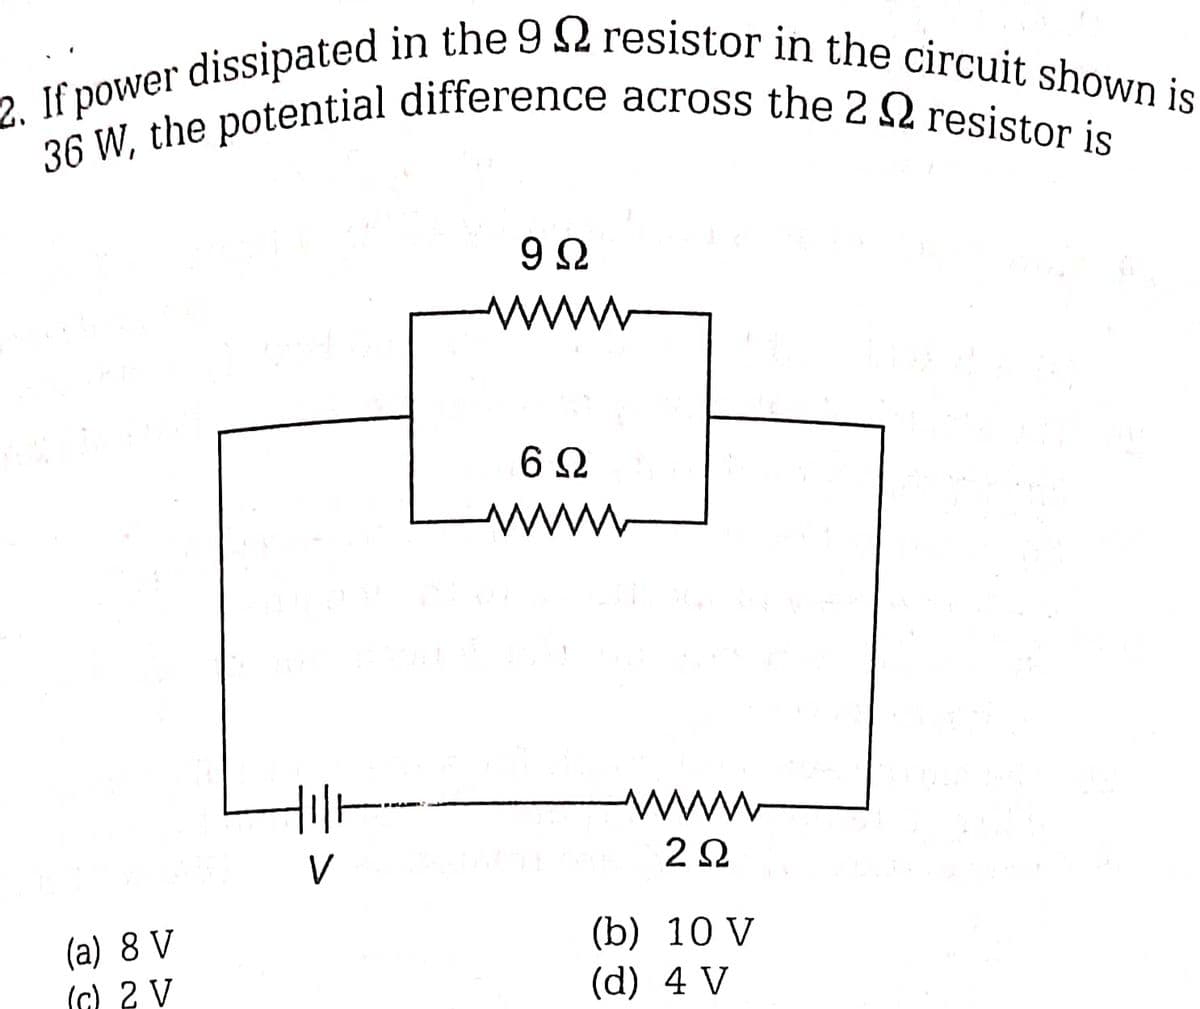 2. If power dissipated in the 9 resistor in the circuit shown is
36 W, the potential difference across the 2 resistor is
(a) 8 V
(c) 2 V
V
9Ω
wwwww
6Ω
wwwww
wwww
2Ω
(b) 10 V
(d) 4 V